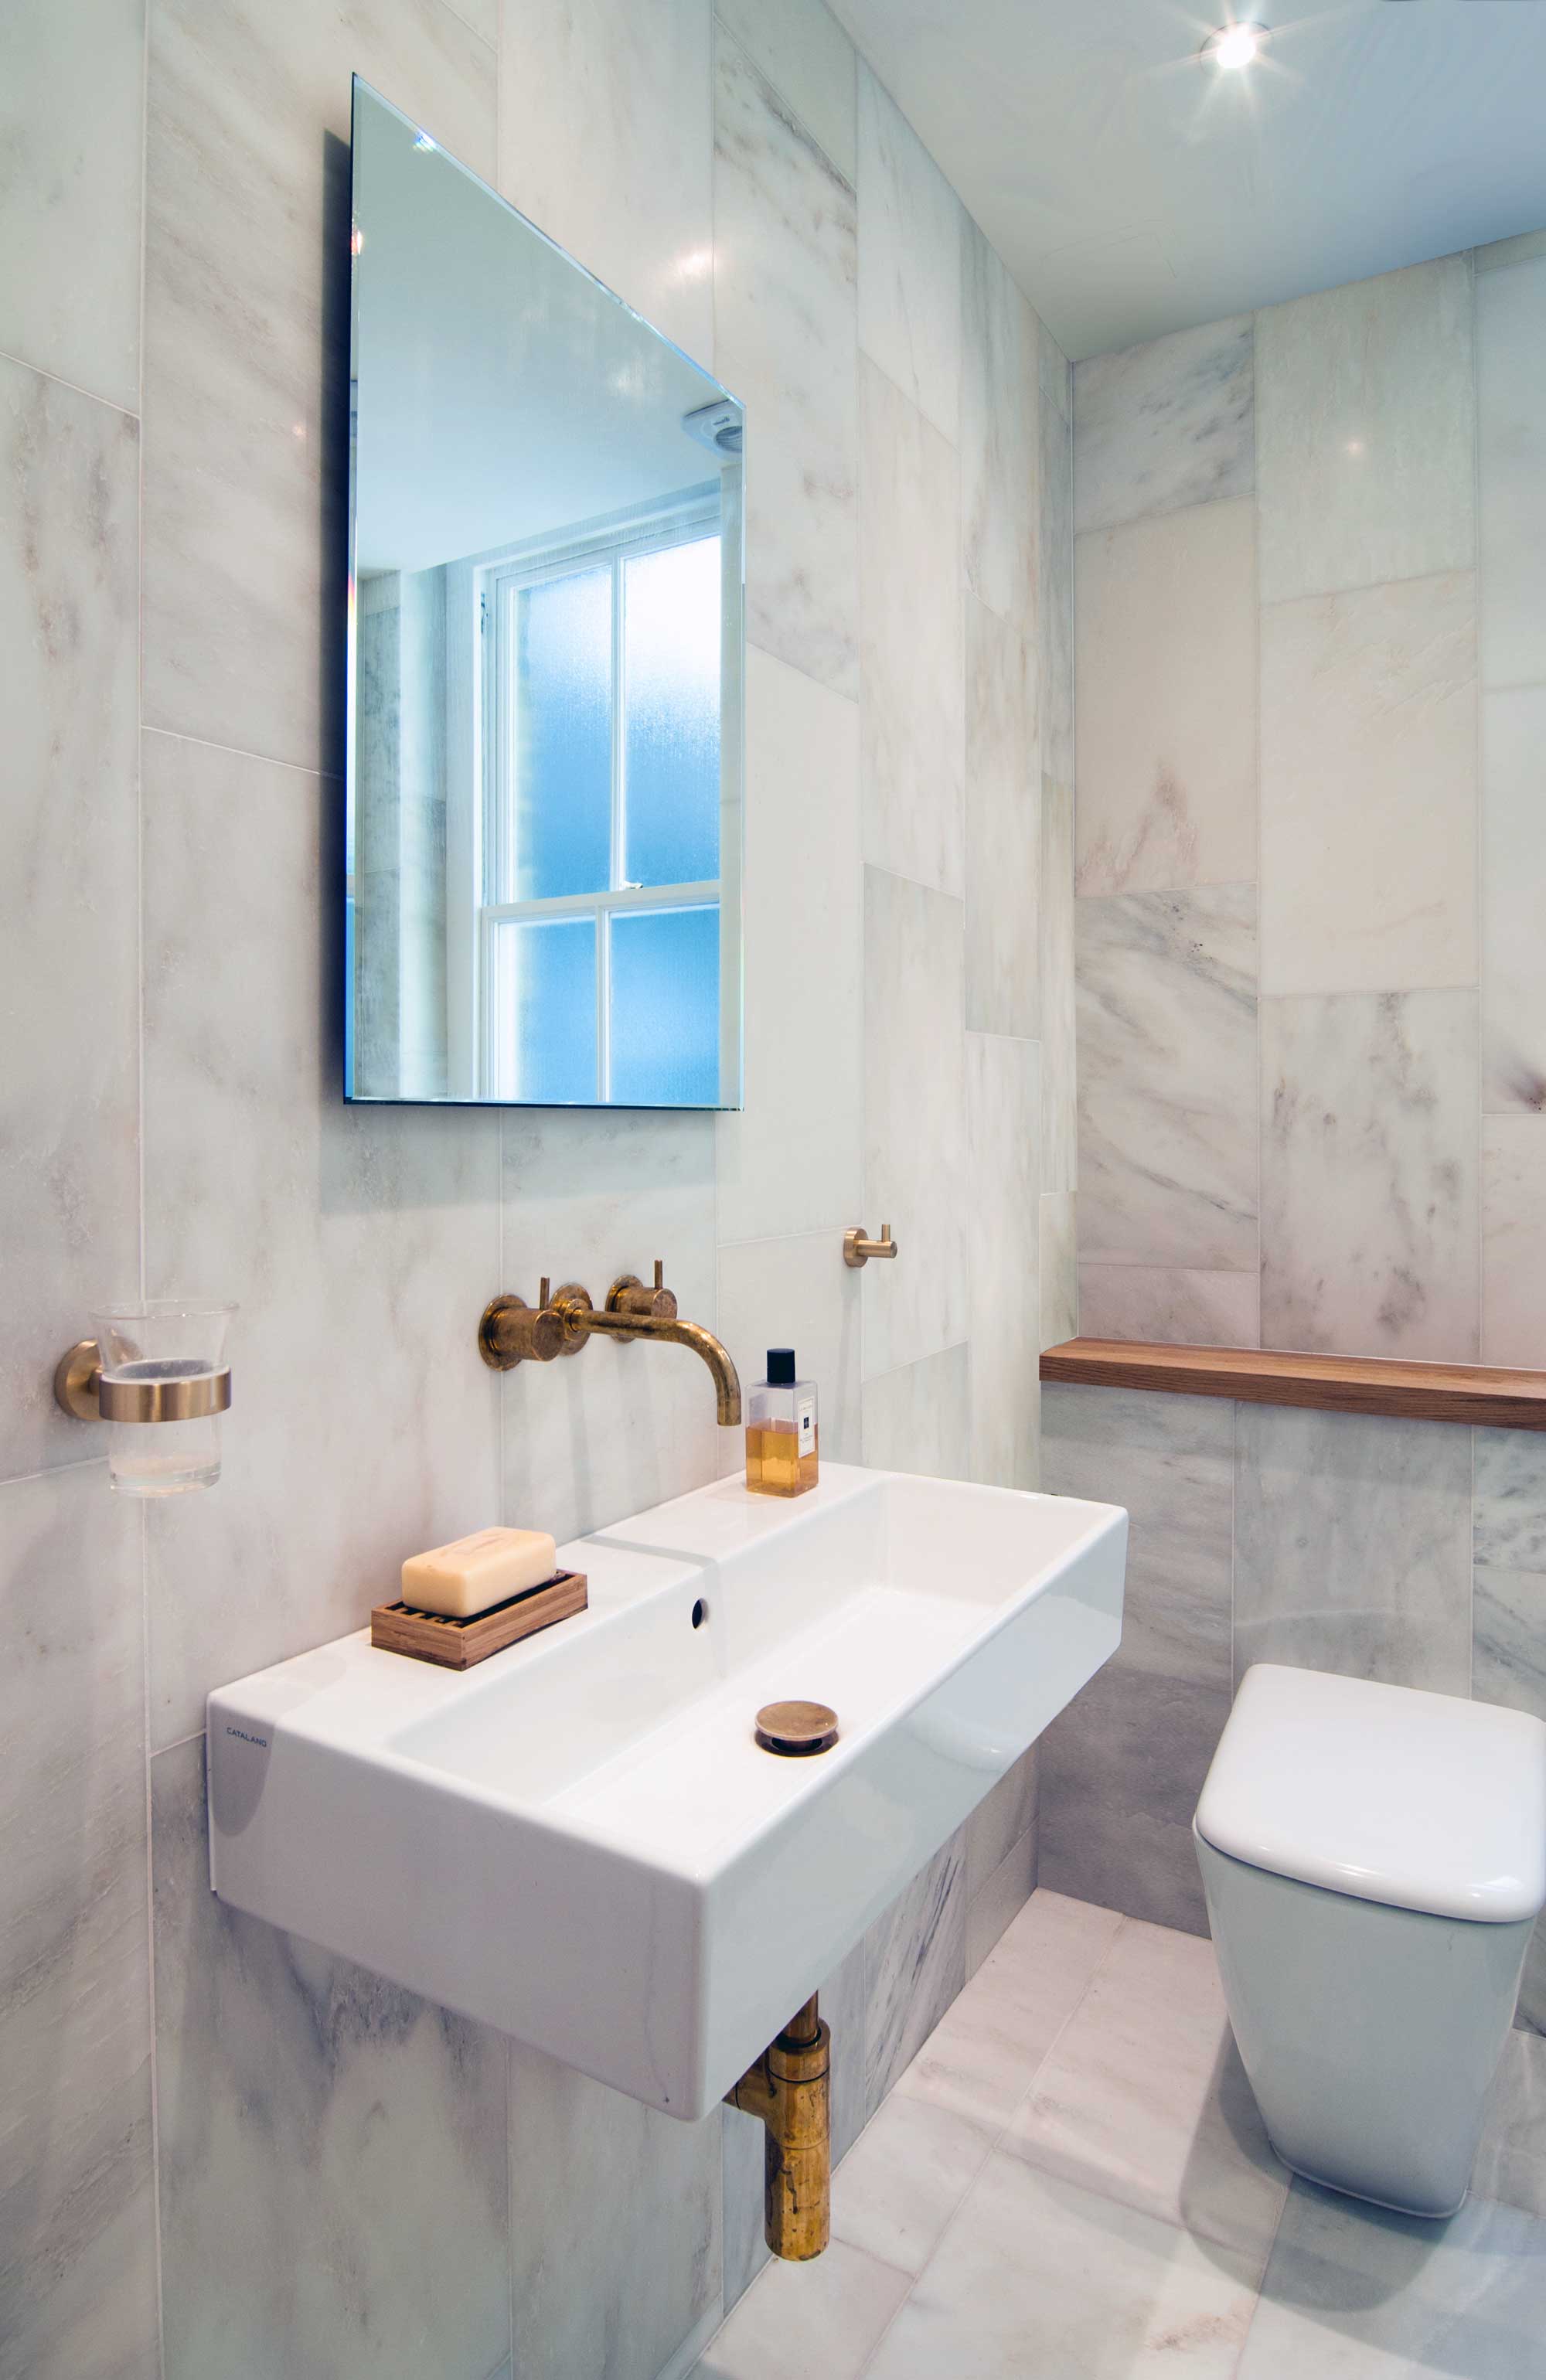 Carrara marble tiles on the walls and floor and Vola brass taps are what make this bathroom so unique and original.